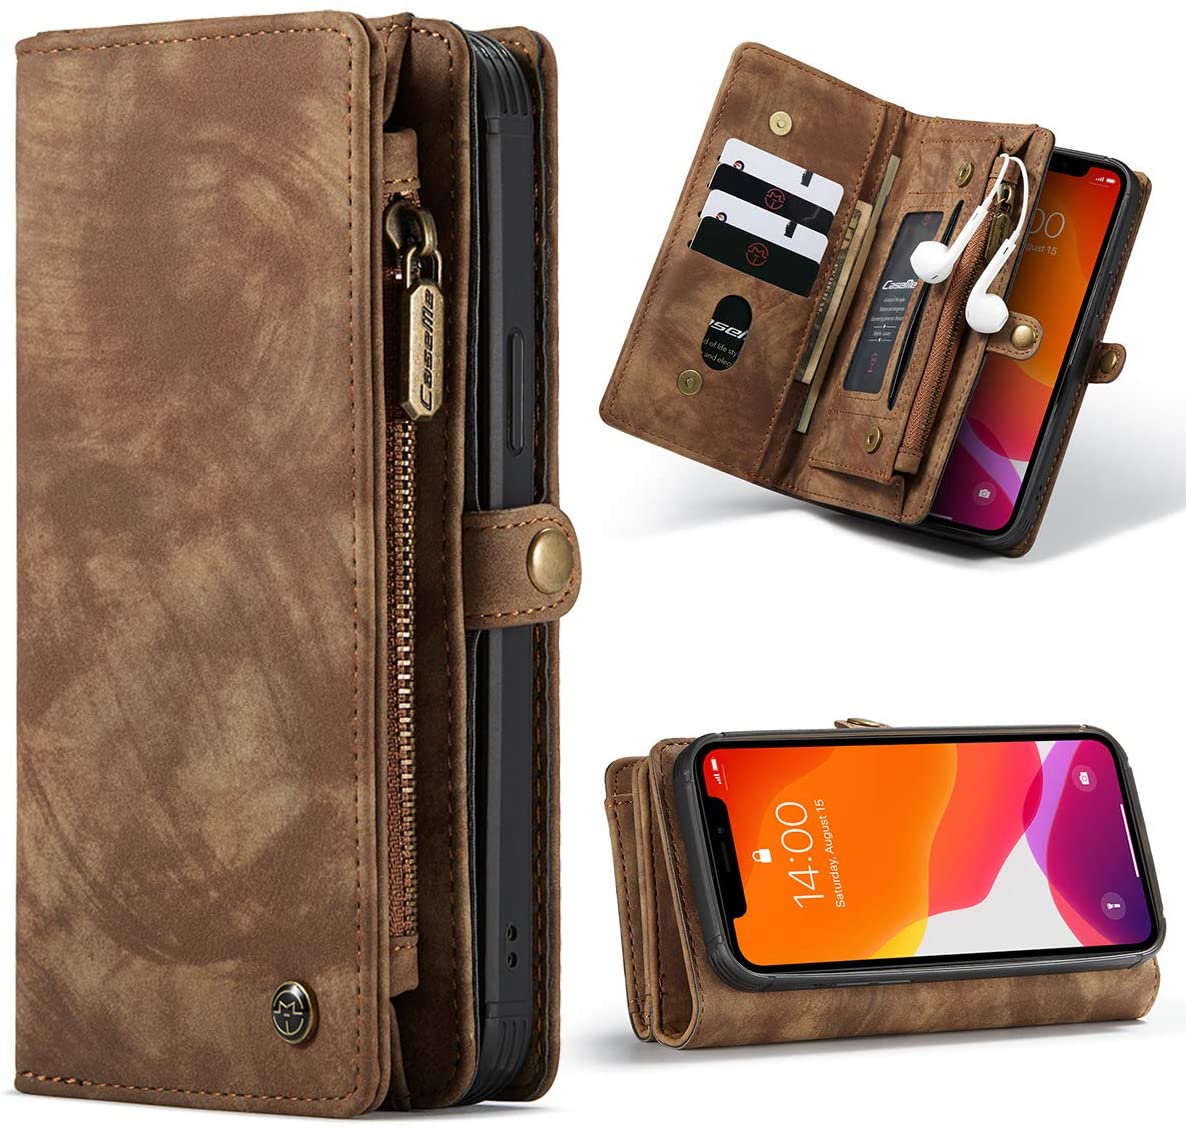 Apple iPhone 12 Pro Max leather multifunctional wallet case cover by excelsior